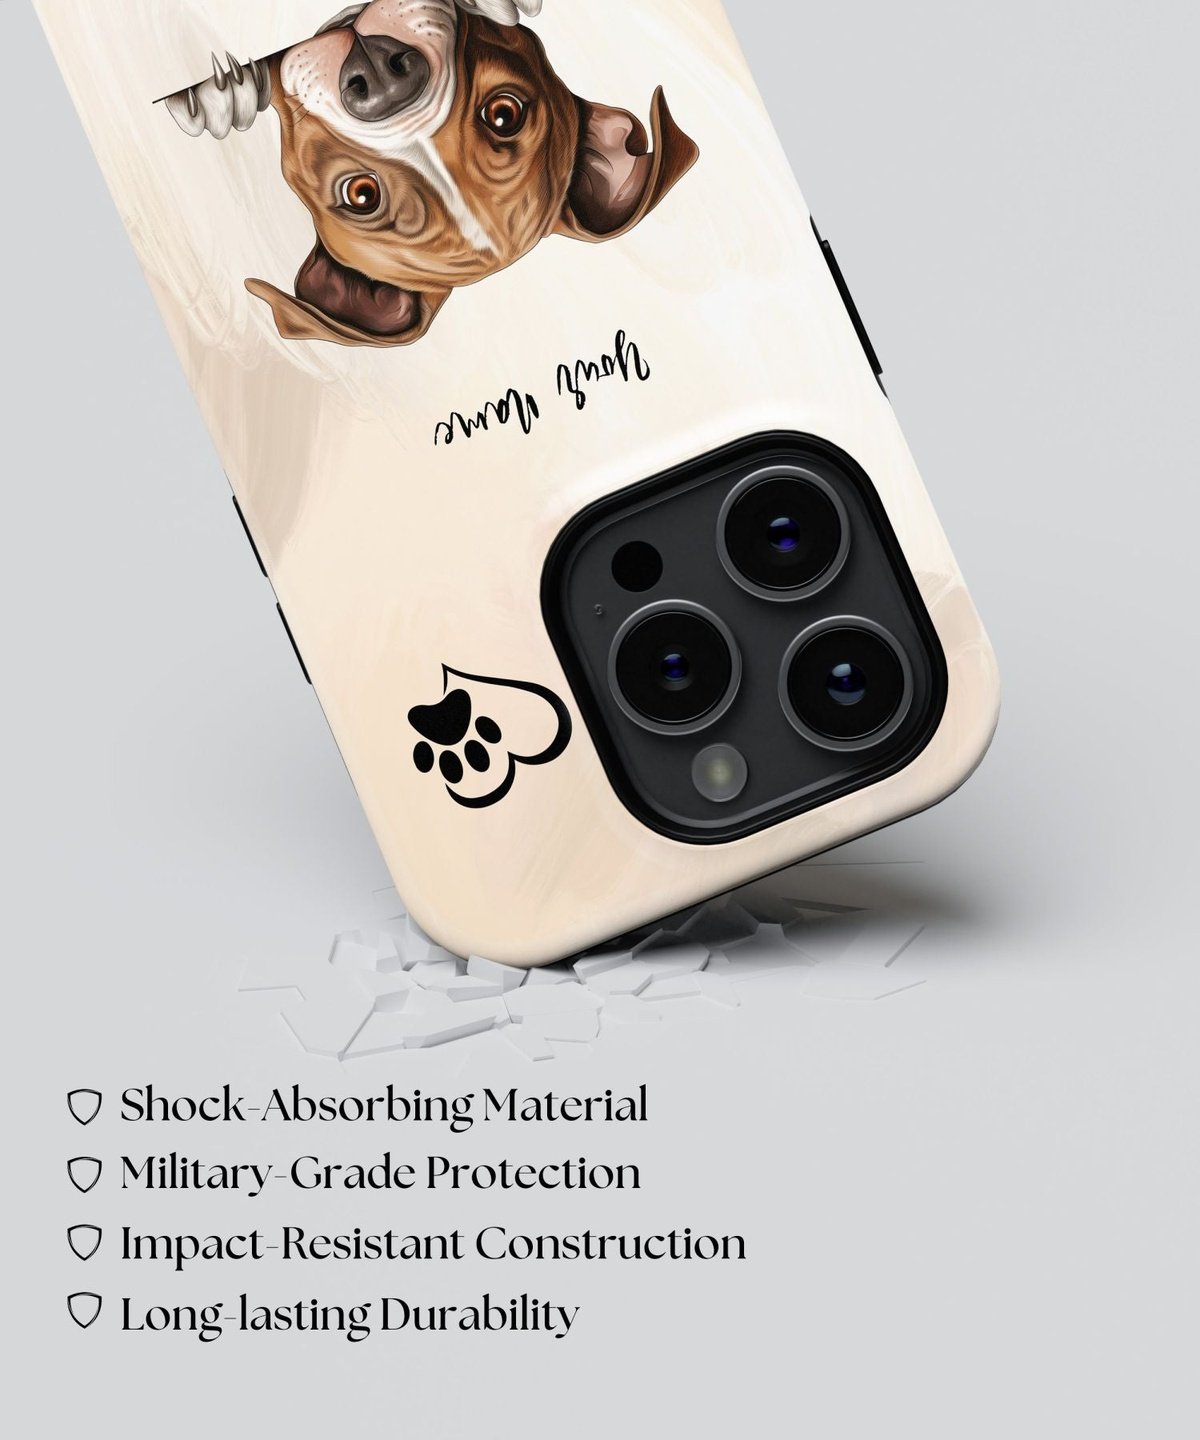 American Staffordshire Terrier Dog Phone - iPhone